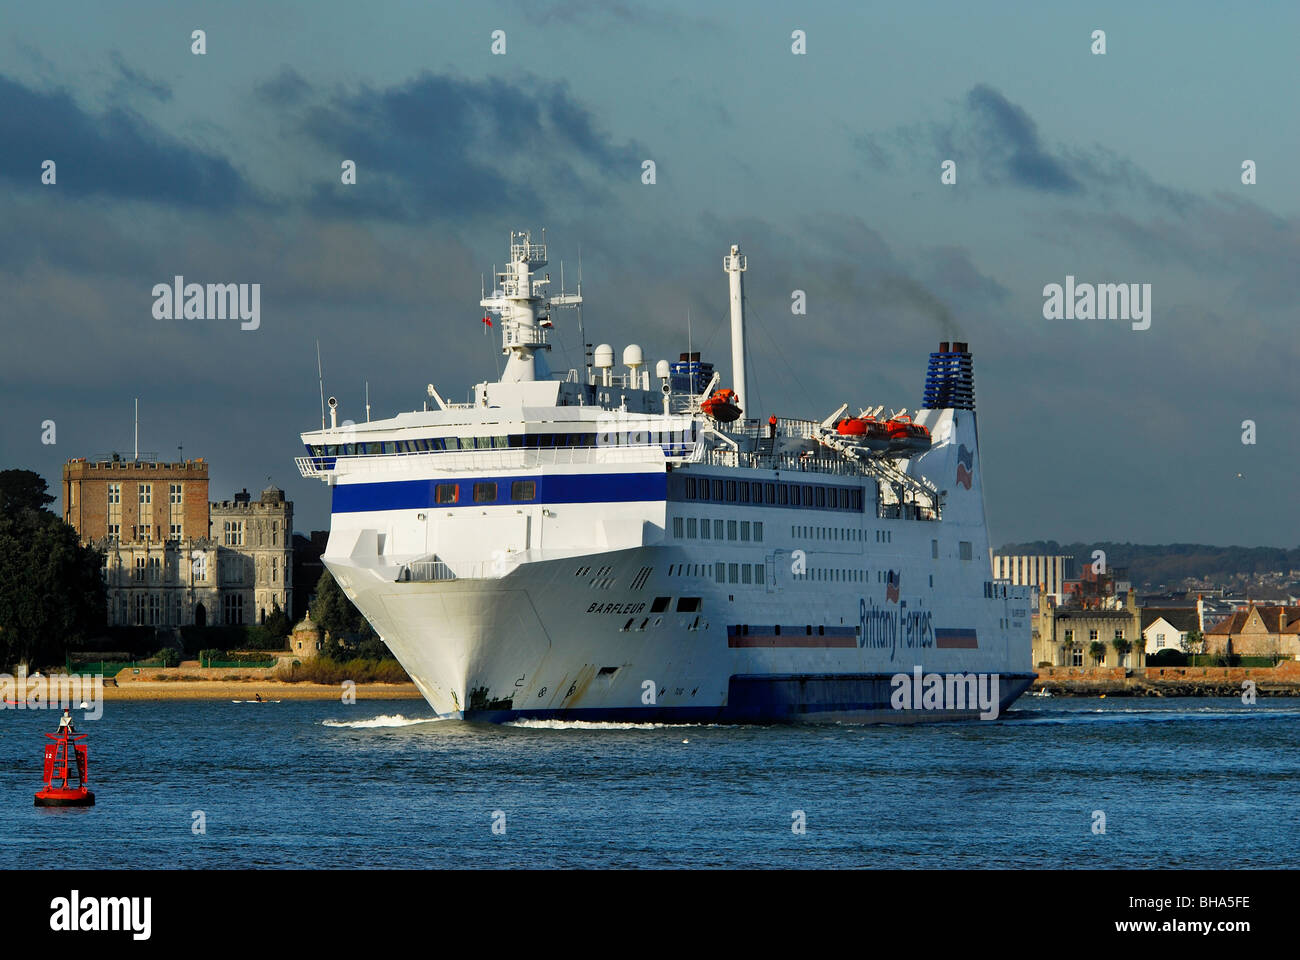 Barfleur ferry departing from Poole. January 2010 Stock Photo